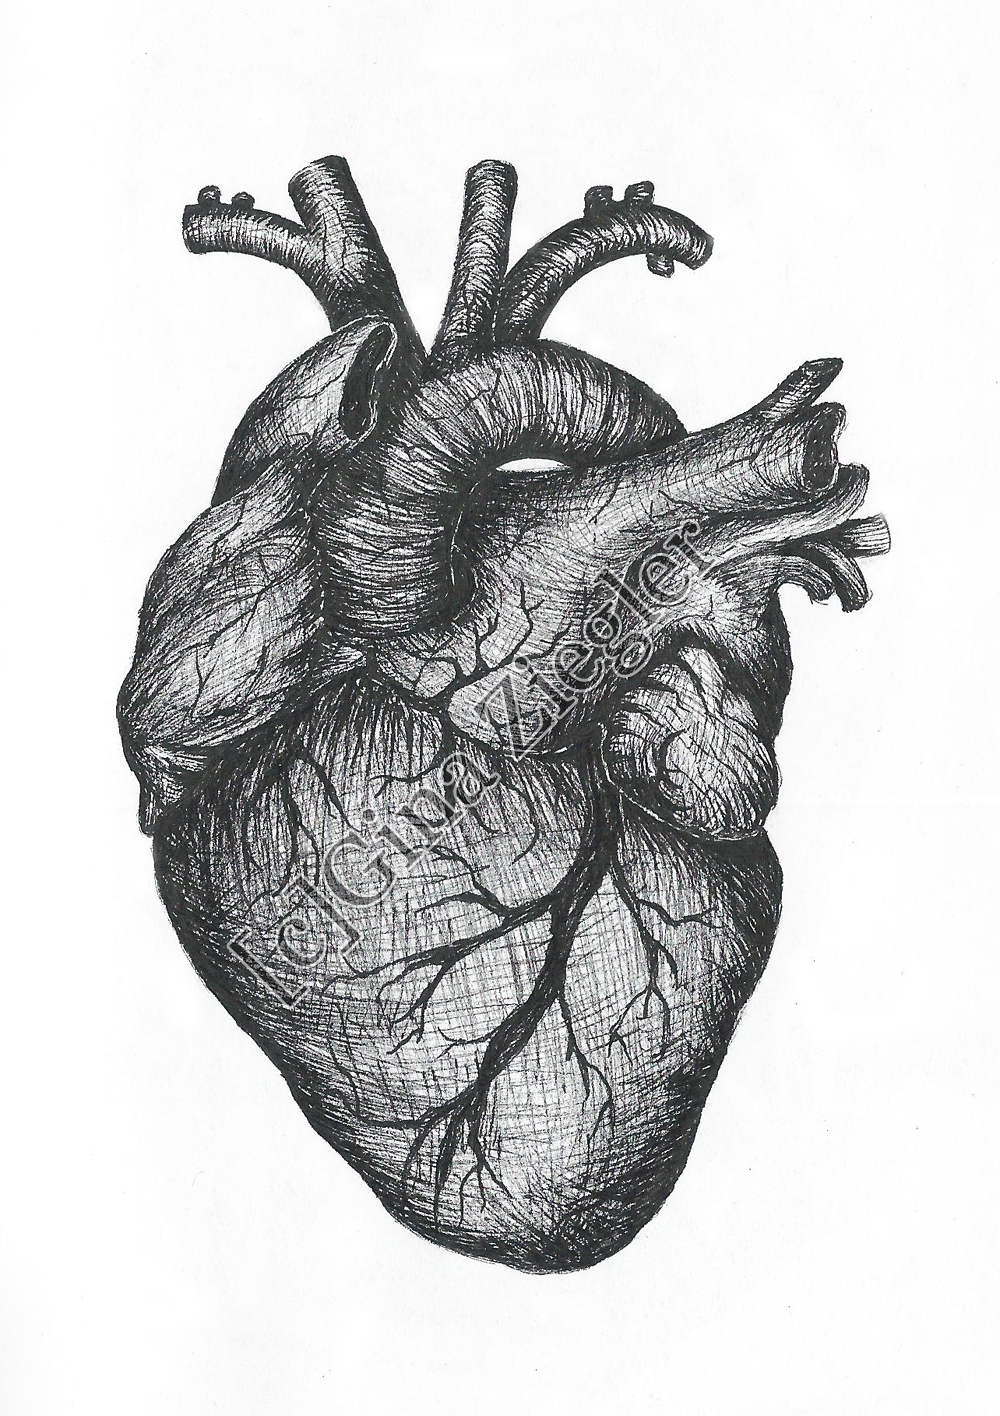 Real Heart Drawing | Clipart library - Free Clipart Images